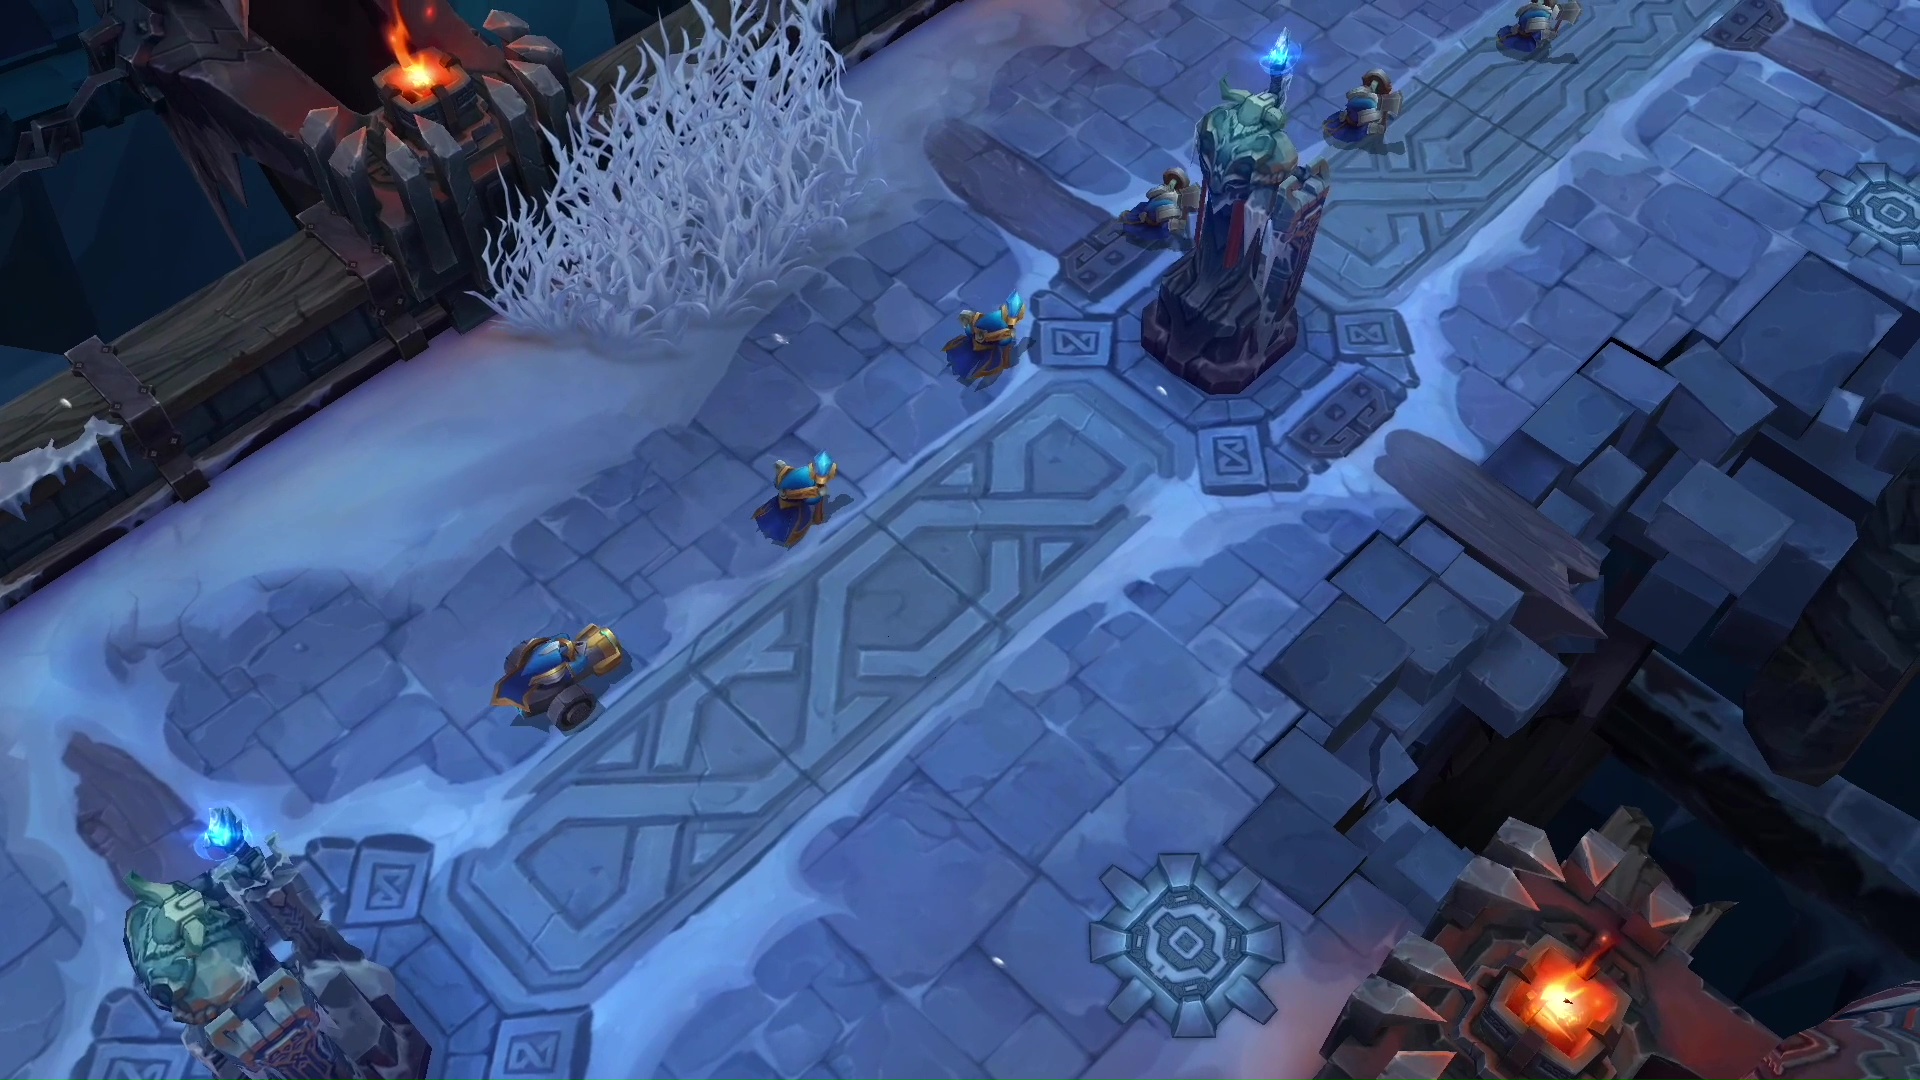 Hands-on: Wild Rift is the perfect League of Legends experience on mobile